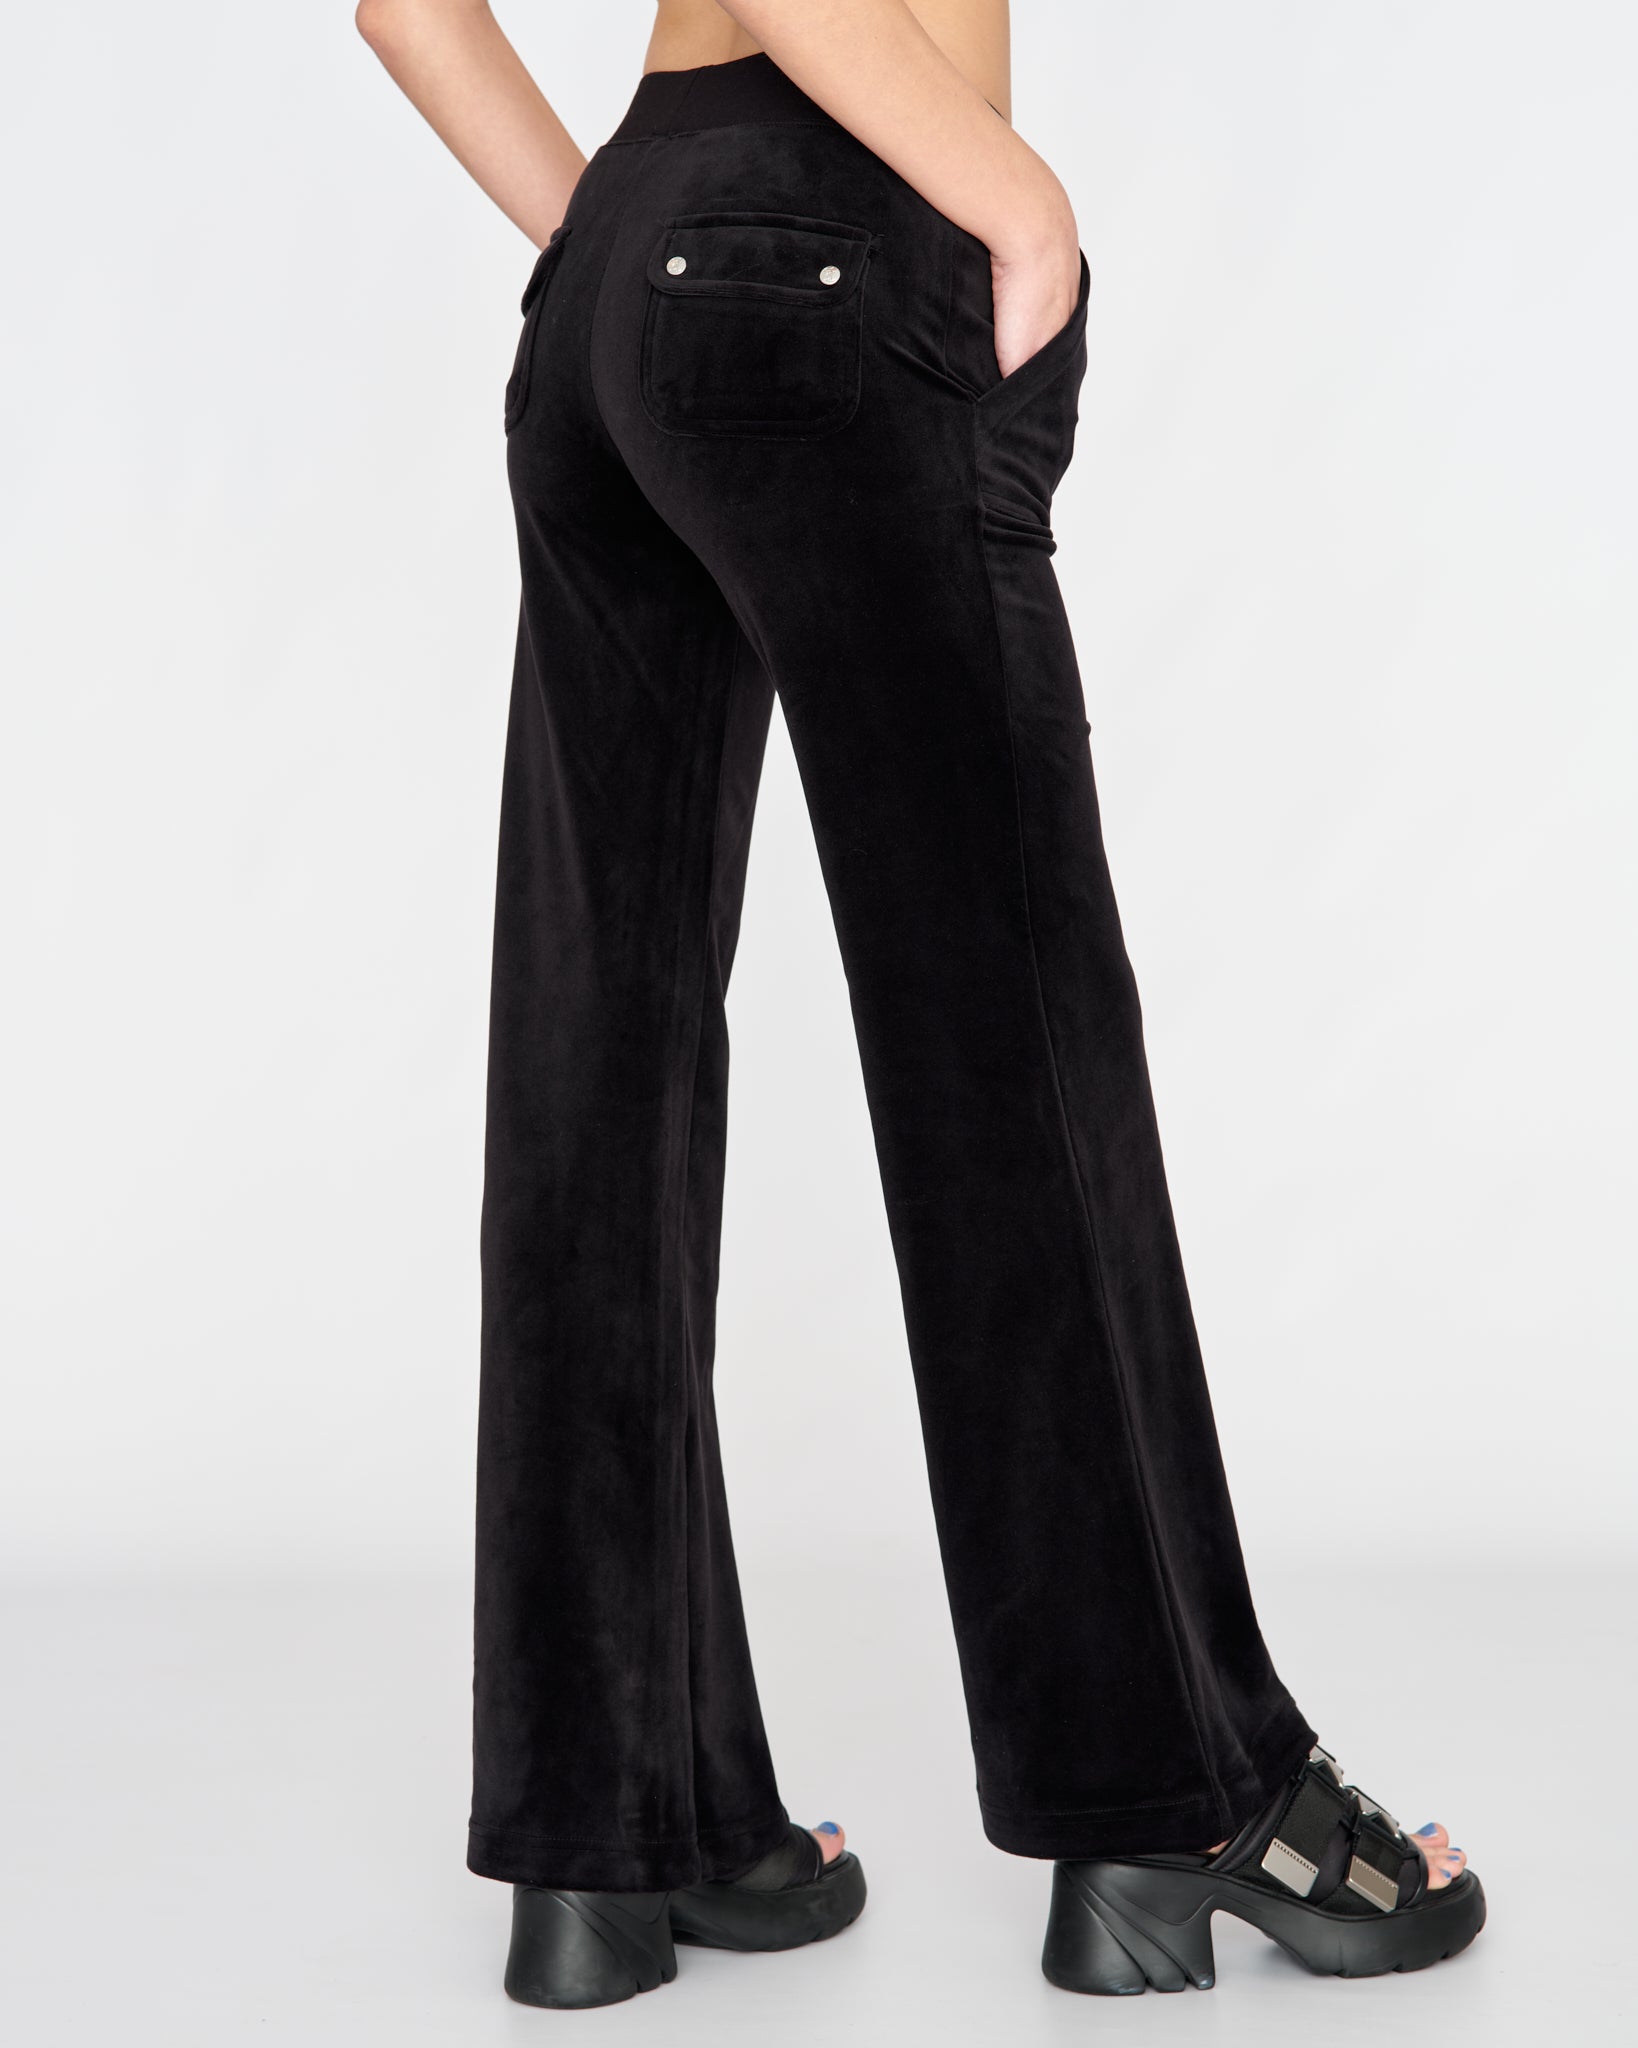 Classic Velour Layla Low Rise Pocket Flare Black - Juicy Couture Scandinavia